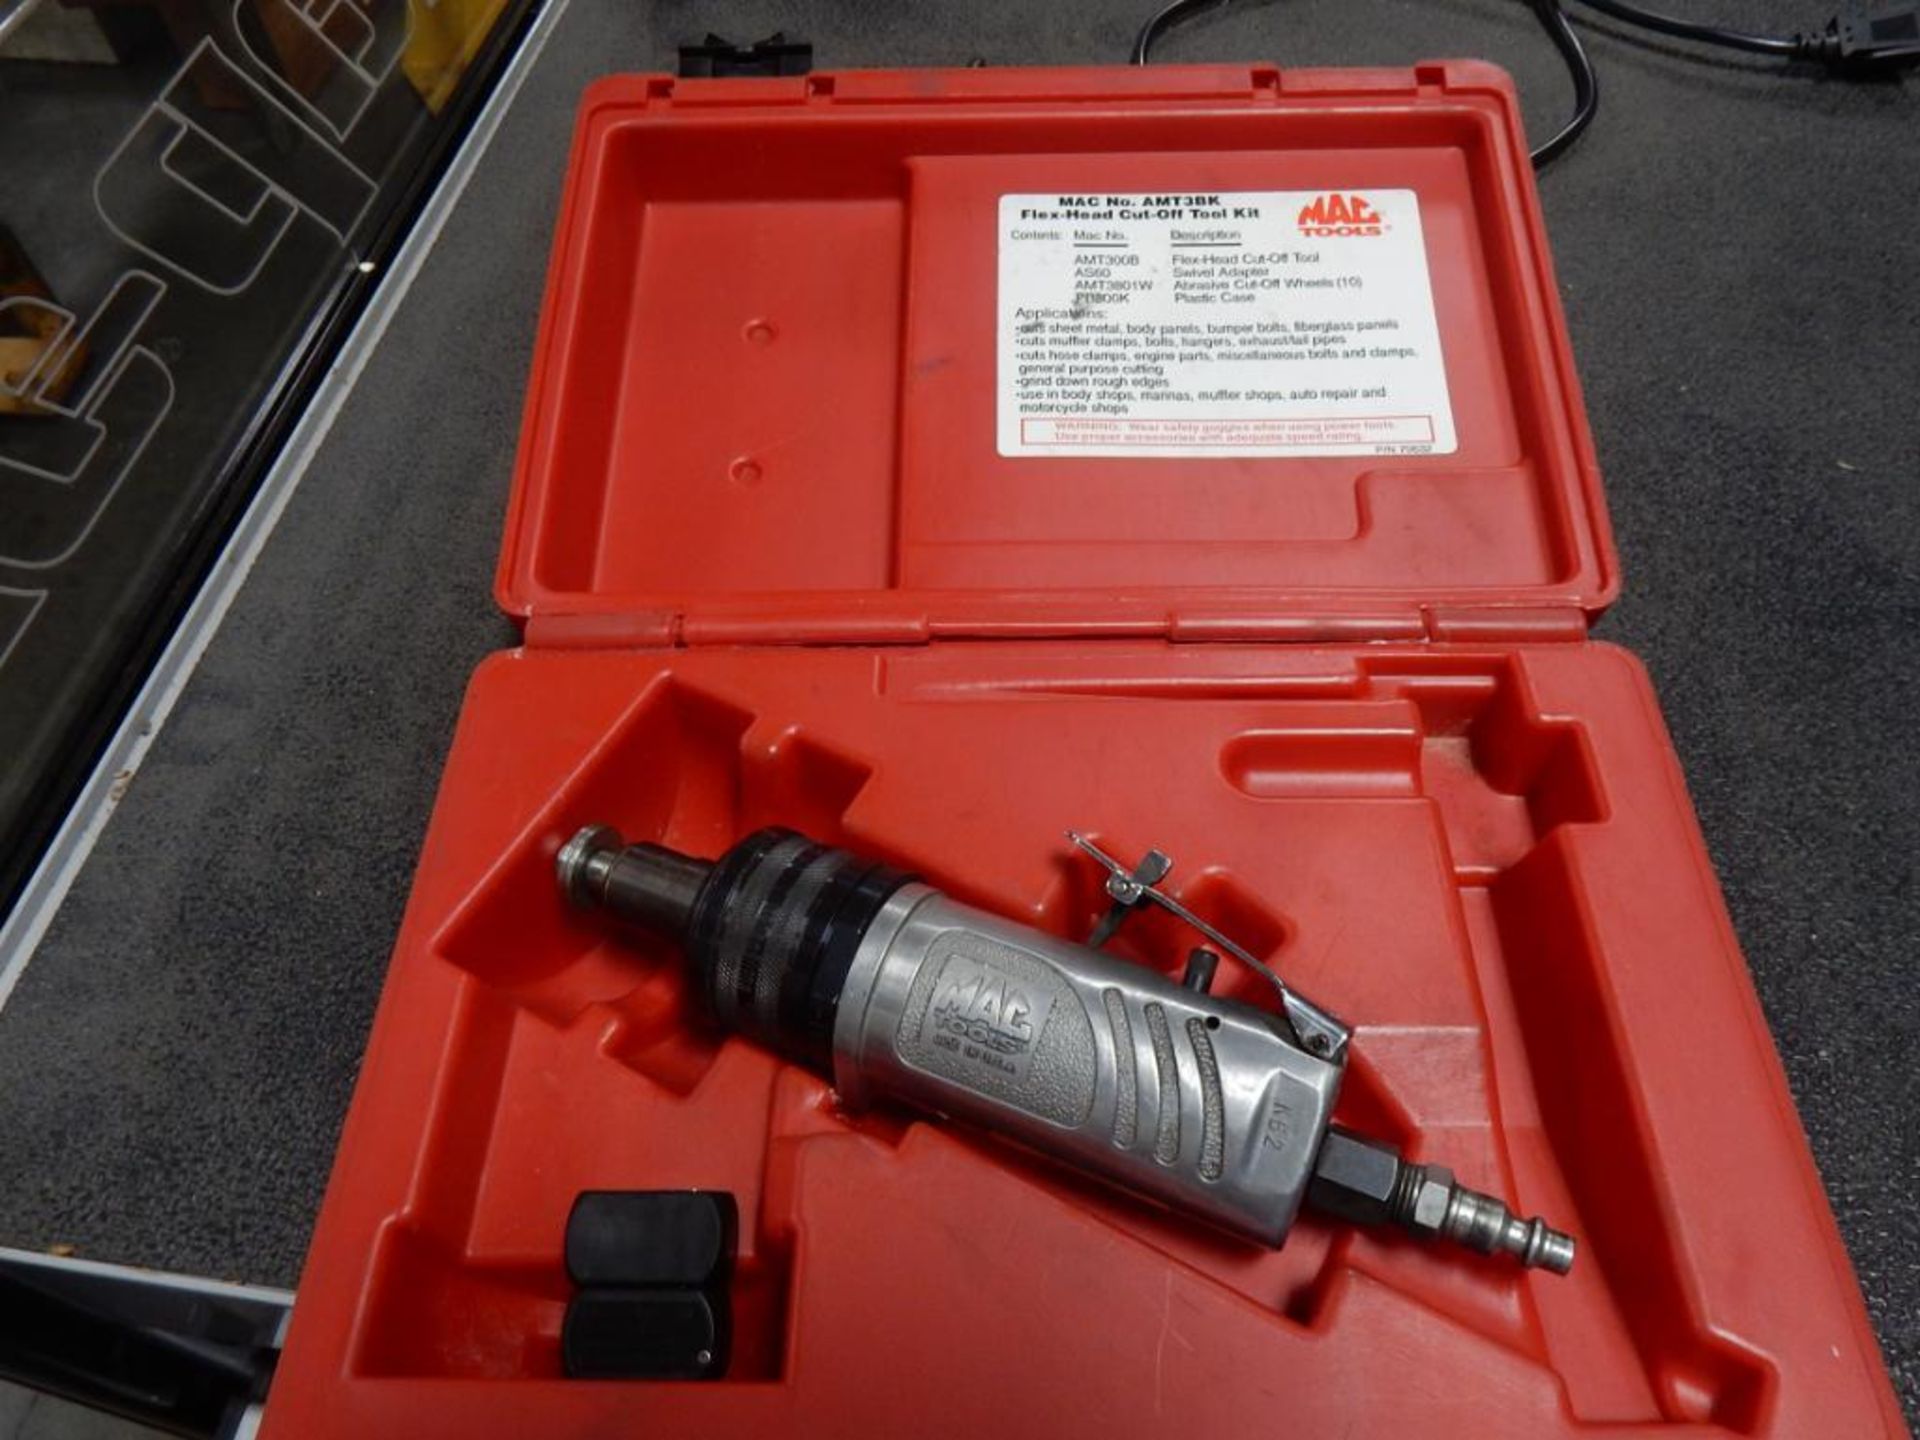 CONTENTS OF DRAWER - AIR DIE GRINDERS, AIR DRILL, AIR RATCHET, ETC. - Image 2 of 2